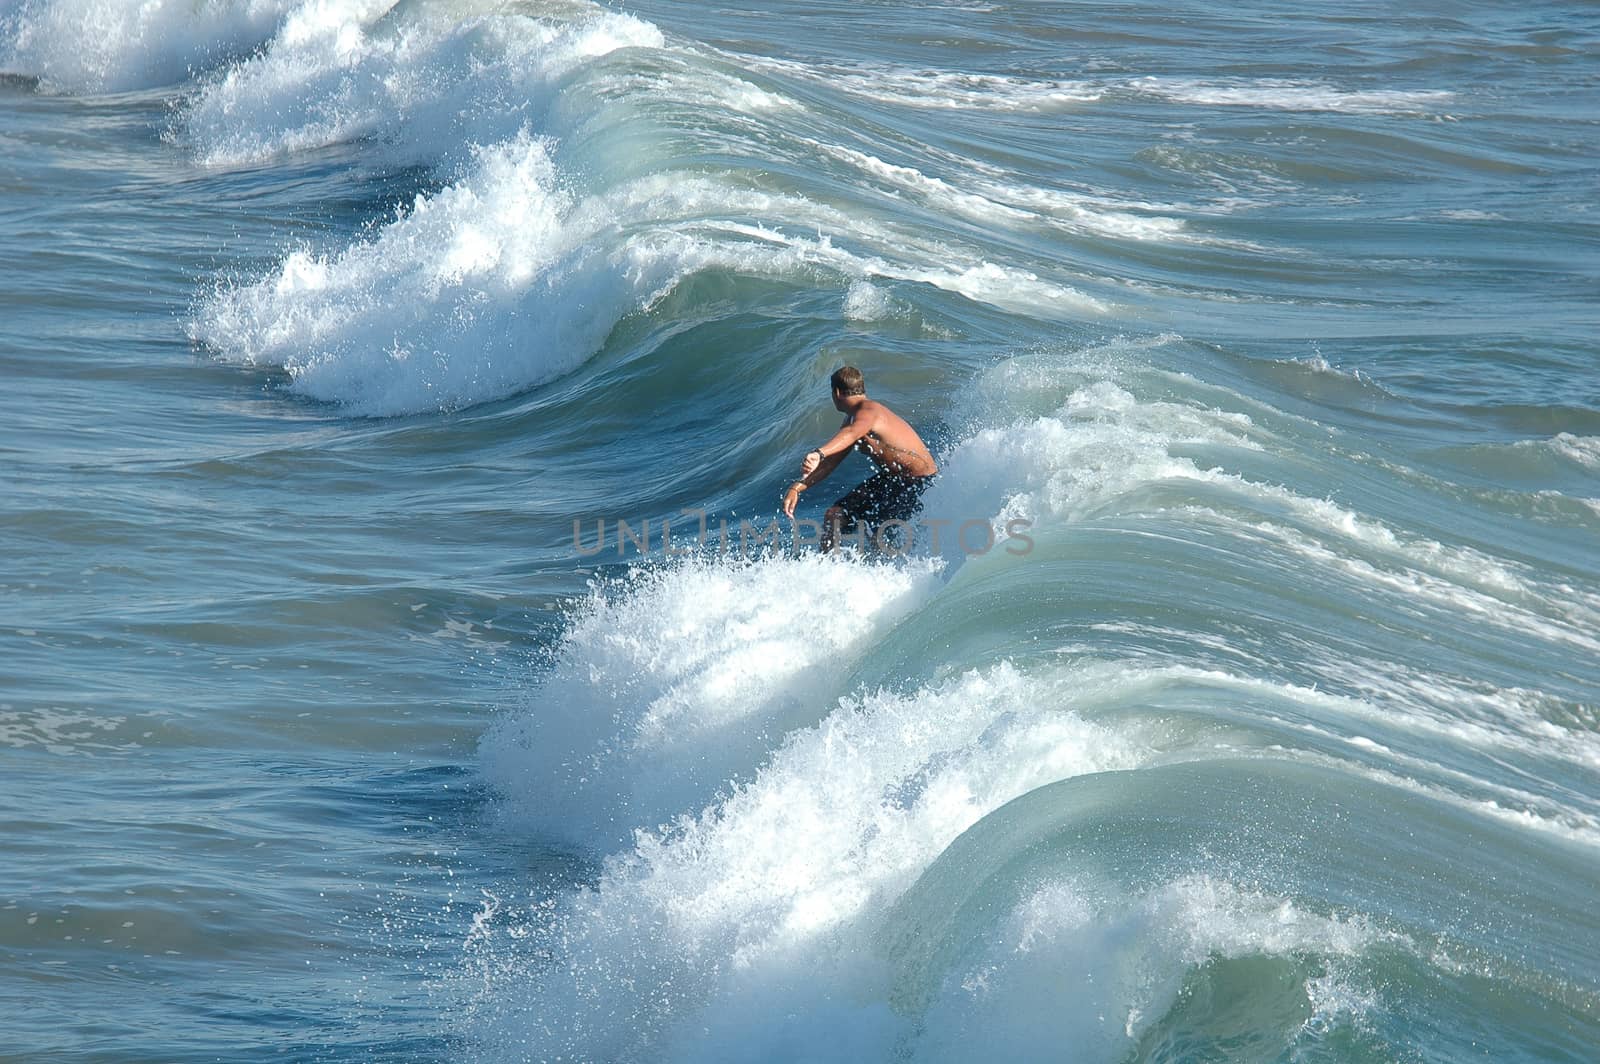 Surfing action, Pacific Beach, CA